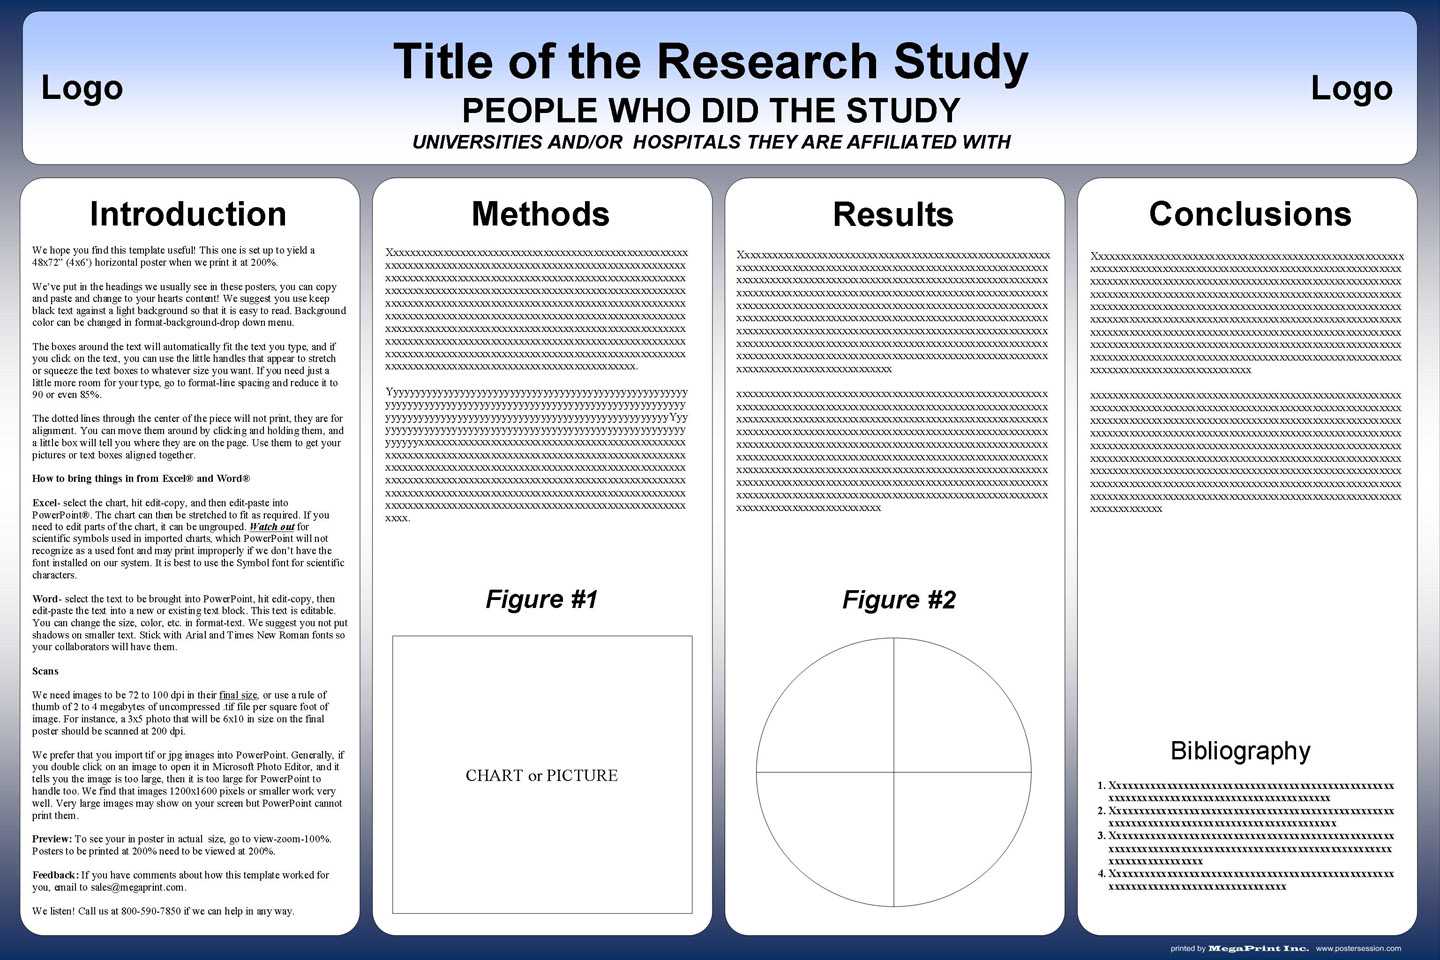 Free Powerpoint Scientific Research Poster Templates For Inside Powerpoint Presentation Template Size